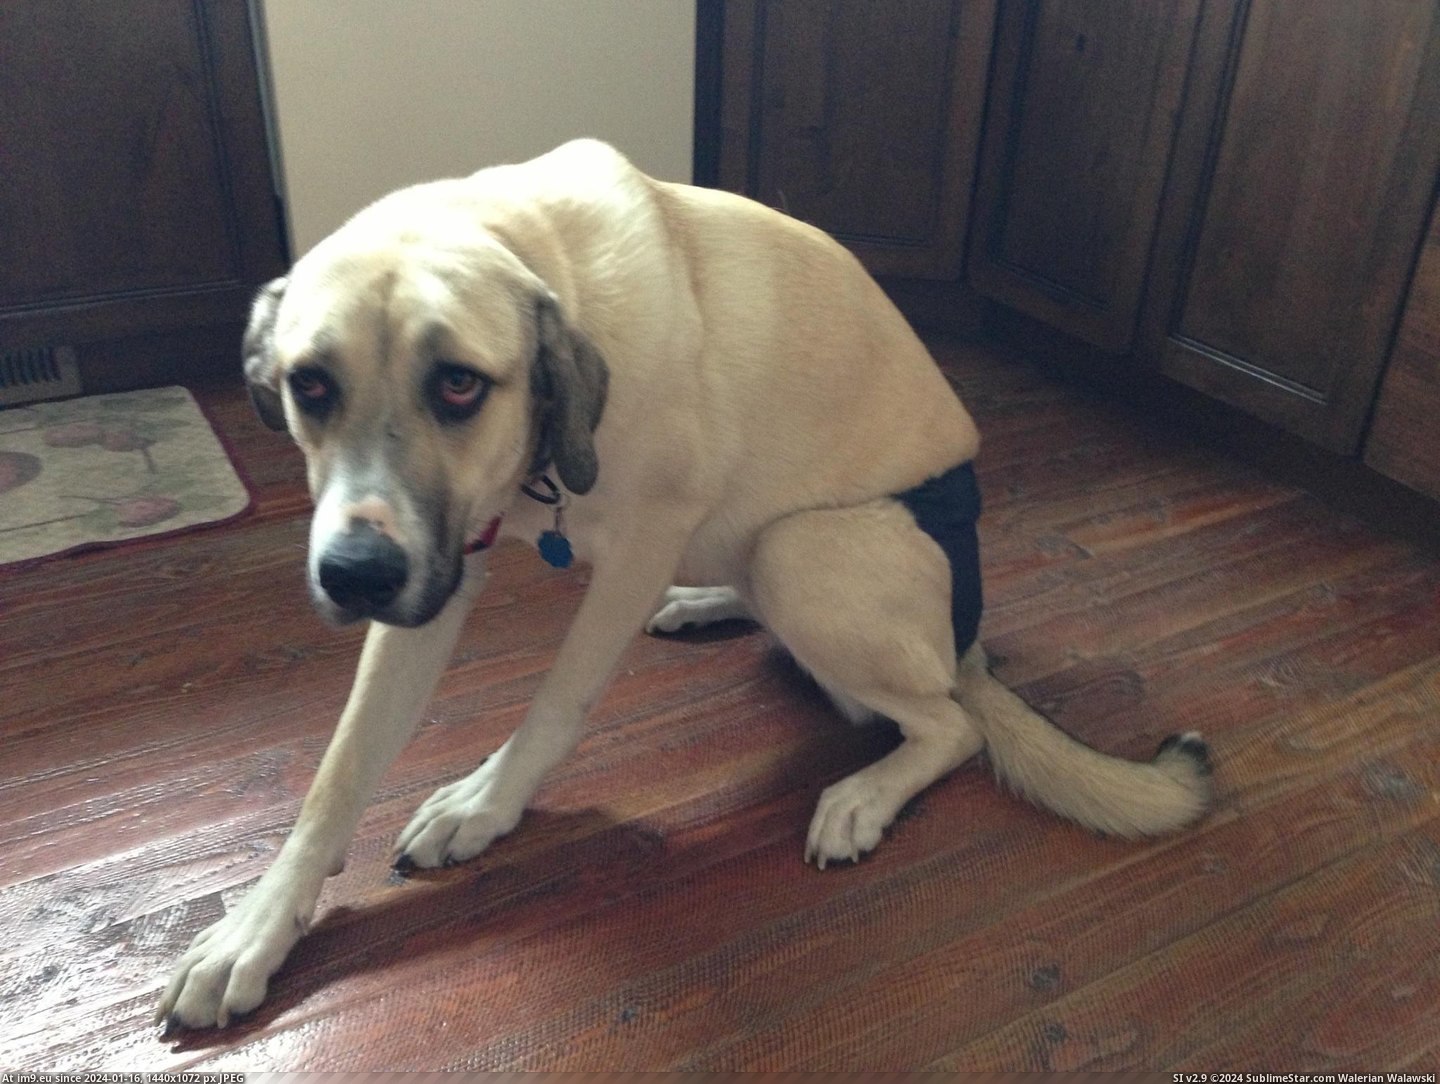 #Friend #Dog #Animal #Diaper #Saddest #Wear #Any #Poor [Aww] My friend's dog has to wear a diaper and it's the saddest I've seen any animal.. Pic. (Изображение из альбом My r/AWW favs))